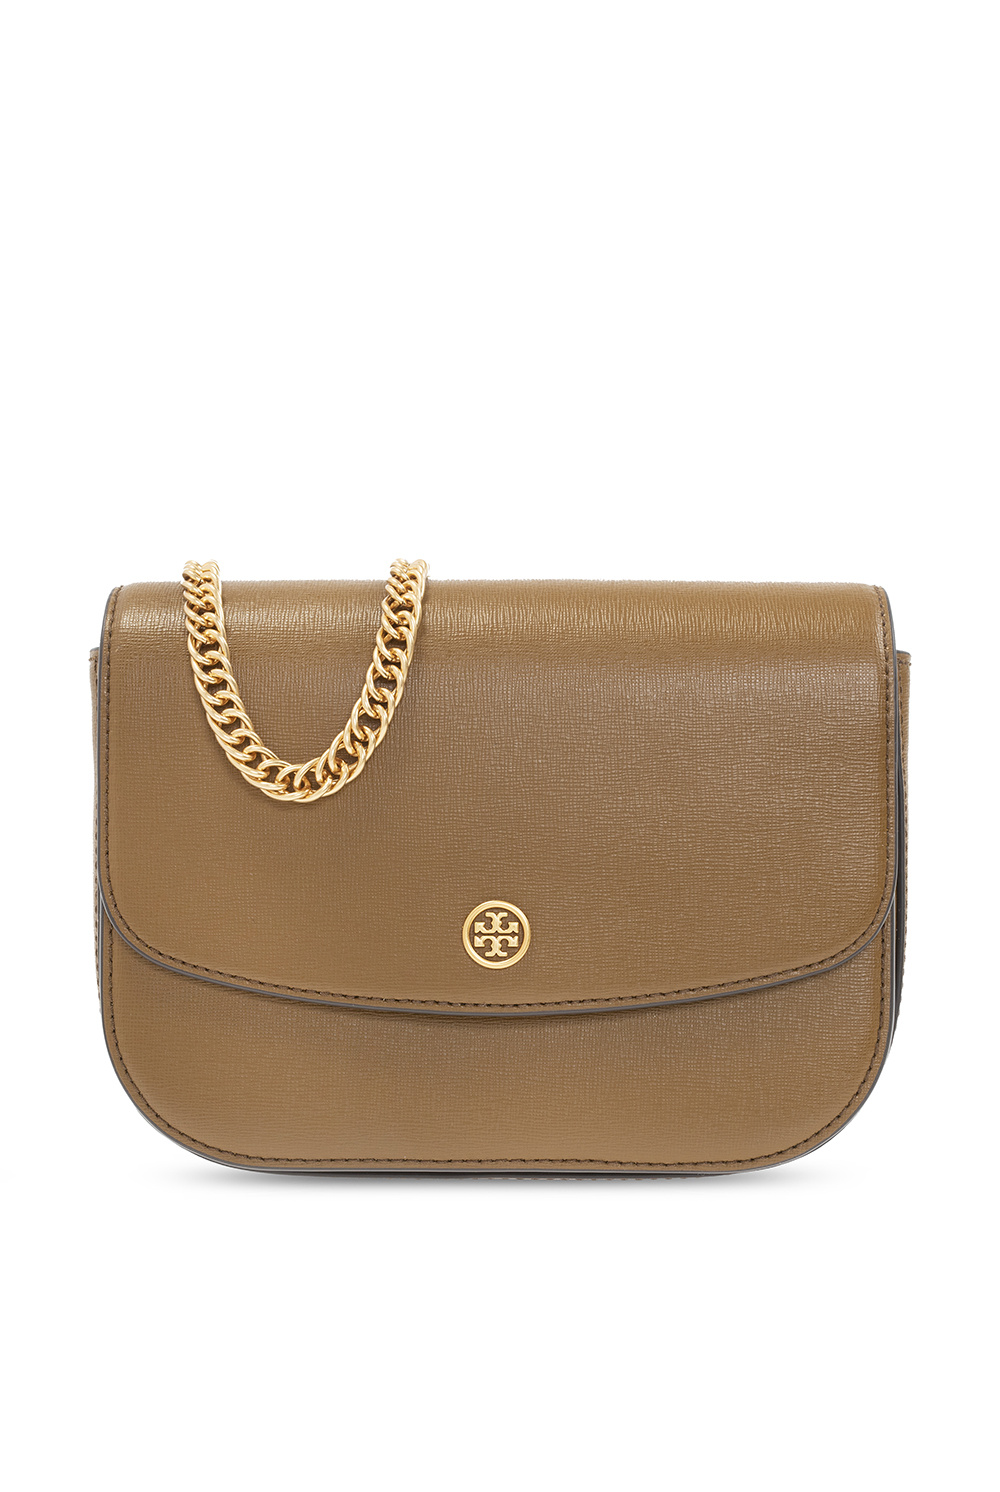 Tory Burch Bistro Brown Robinson Pebbled Leather Small Tote